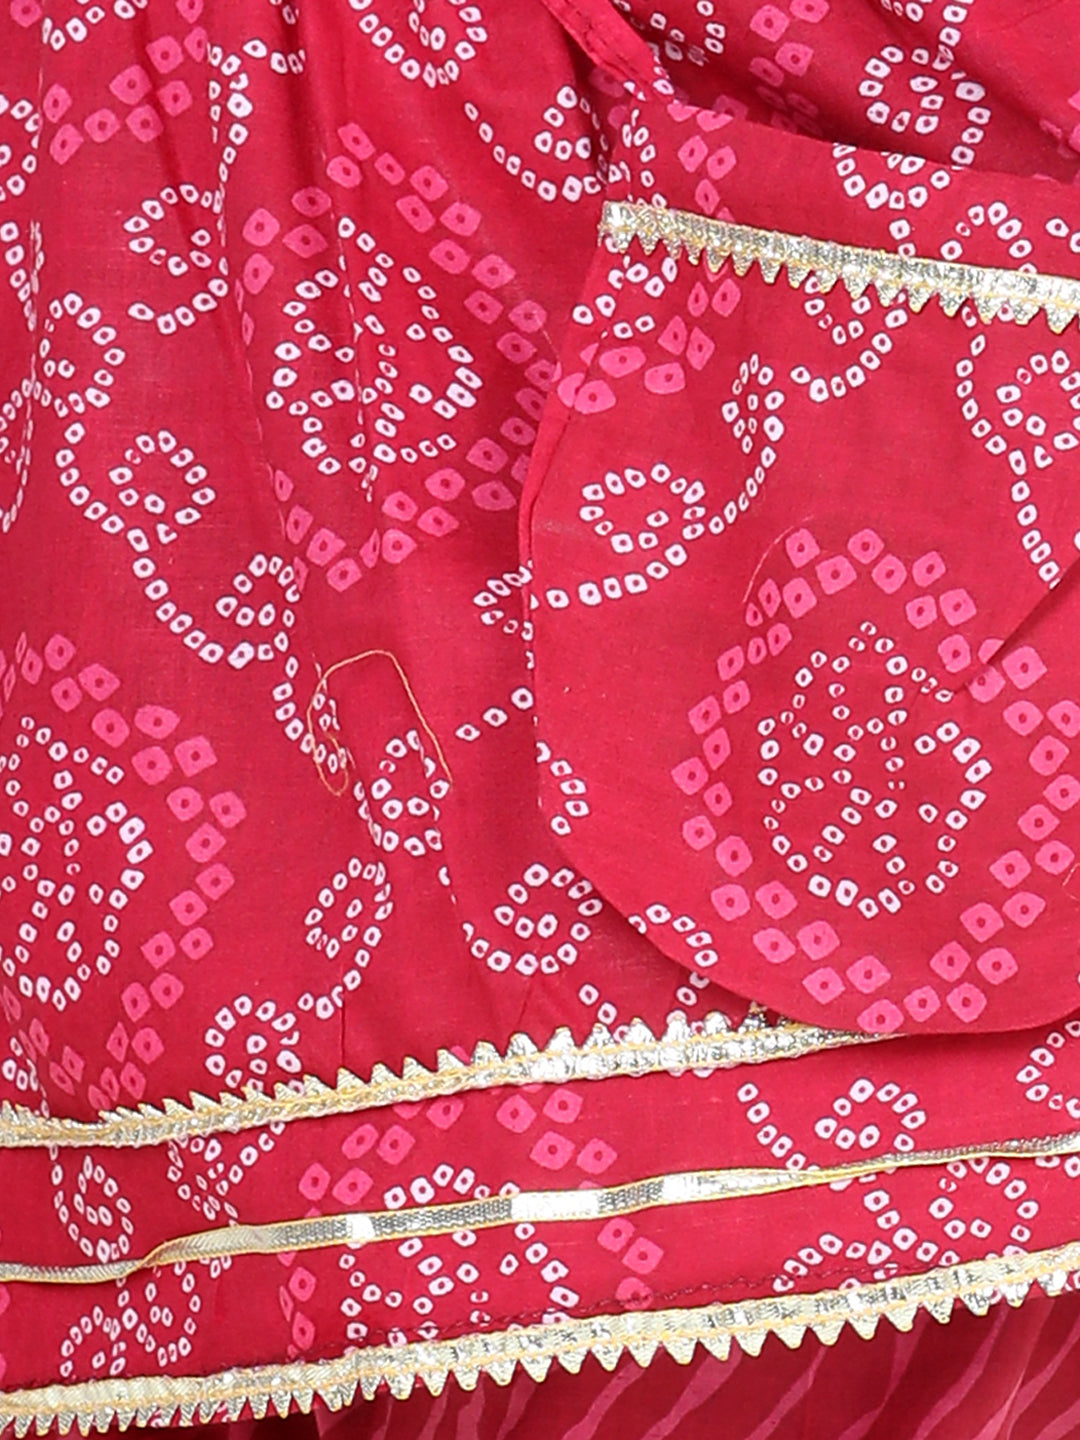 Cotton Printed Off Shoulder Kurti Pant Set with Side sling bag for Girls-Pink NOZ2TOZ - Made In INDIA.